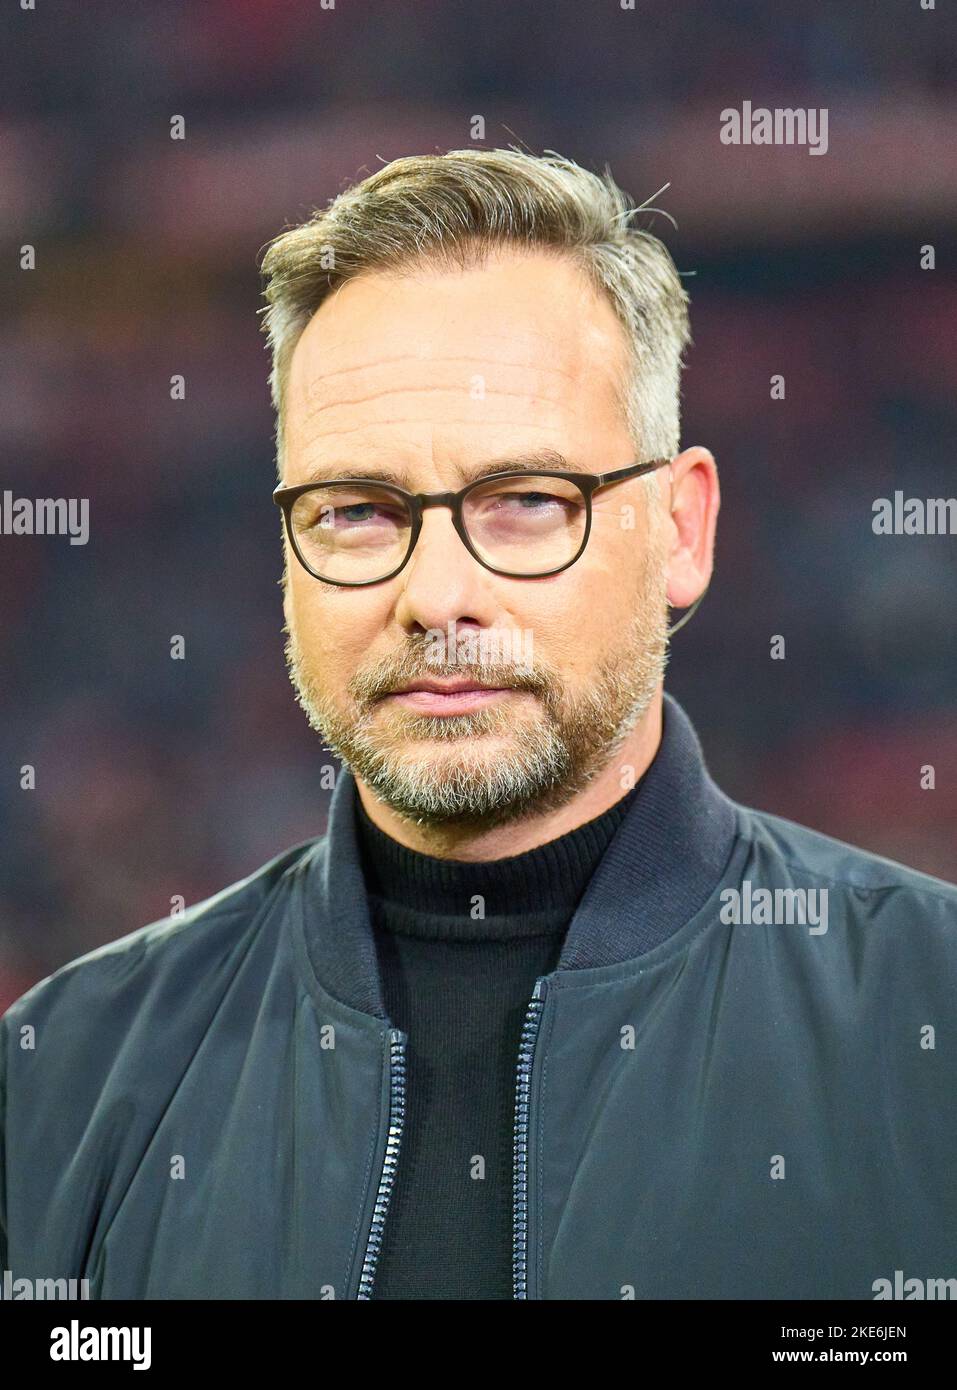 Matthias Opdenhoevel, TV presenter,  in the match FC BAYERN MÜNCHEN - SV WERDER BREMEN 6-1 1.German Football League on Nov 8, 2022 in Munich, Germany. Season 2022/2023, matchday 14, 1.Bundesliga, FCB, München, 14.Spieltag © Peter Schatz / Alamy Live News    - DFL REGULATIONS PROHIBIT ANY USE OF PHOTOGRAPHS as IMAGE SEQUENCES and/or QUASI-VIDEO - Stock Photo